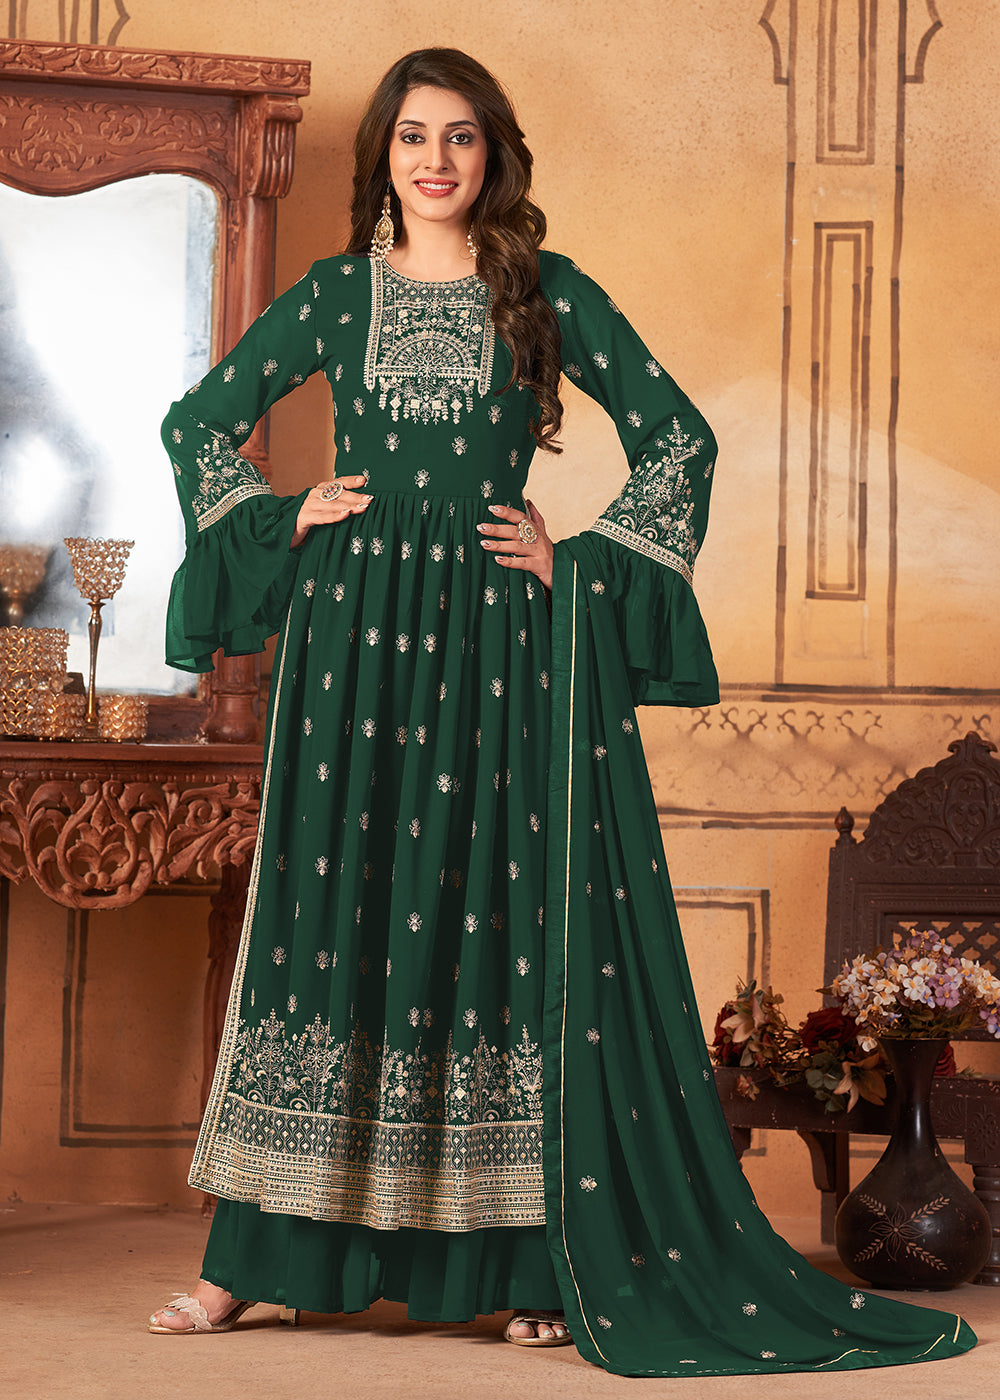 Buy Now Bell Sleeved Glittering Green Wedding Function Suit Set Online in USA, UK, Canada & Worldwide at Empress Clothing.